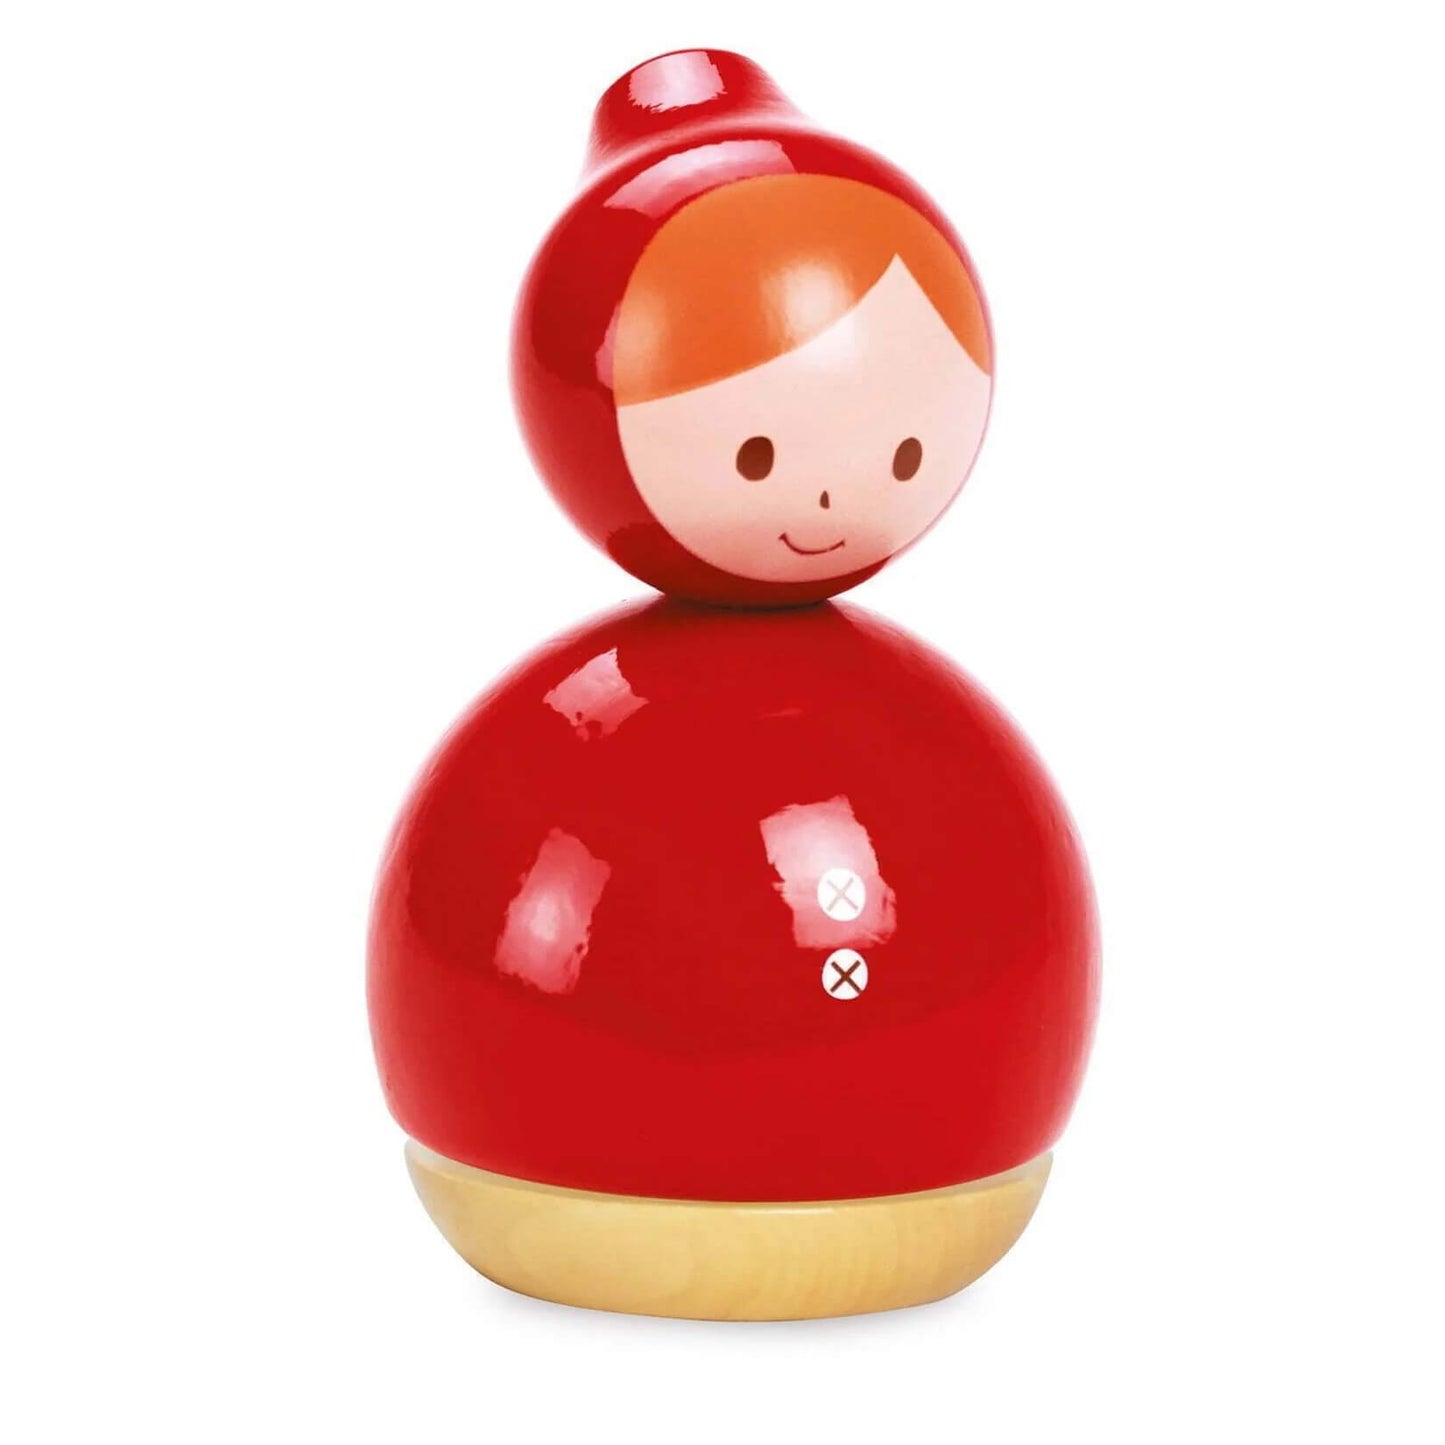 Vilac Red Riding Music Box made to help educate your child on the story of Little Red Riding Hood and also give them a sweet melody to sleep or relax to.